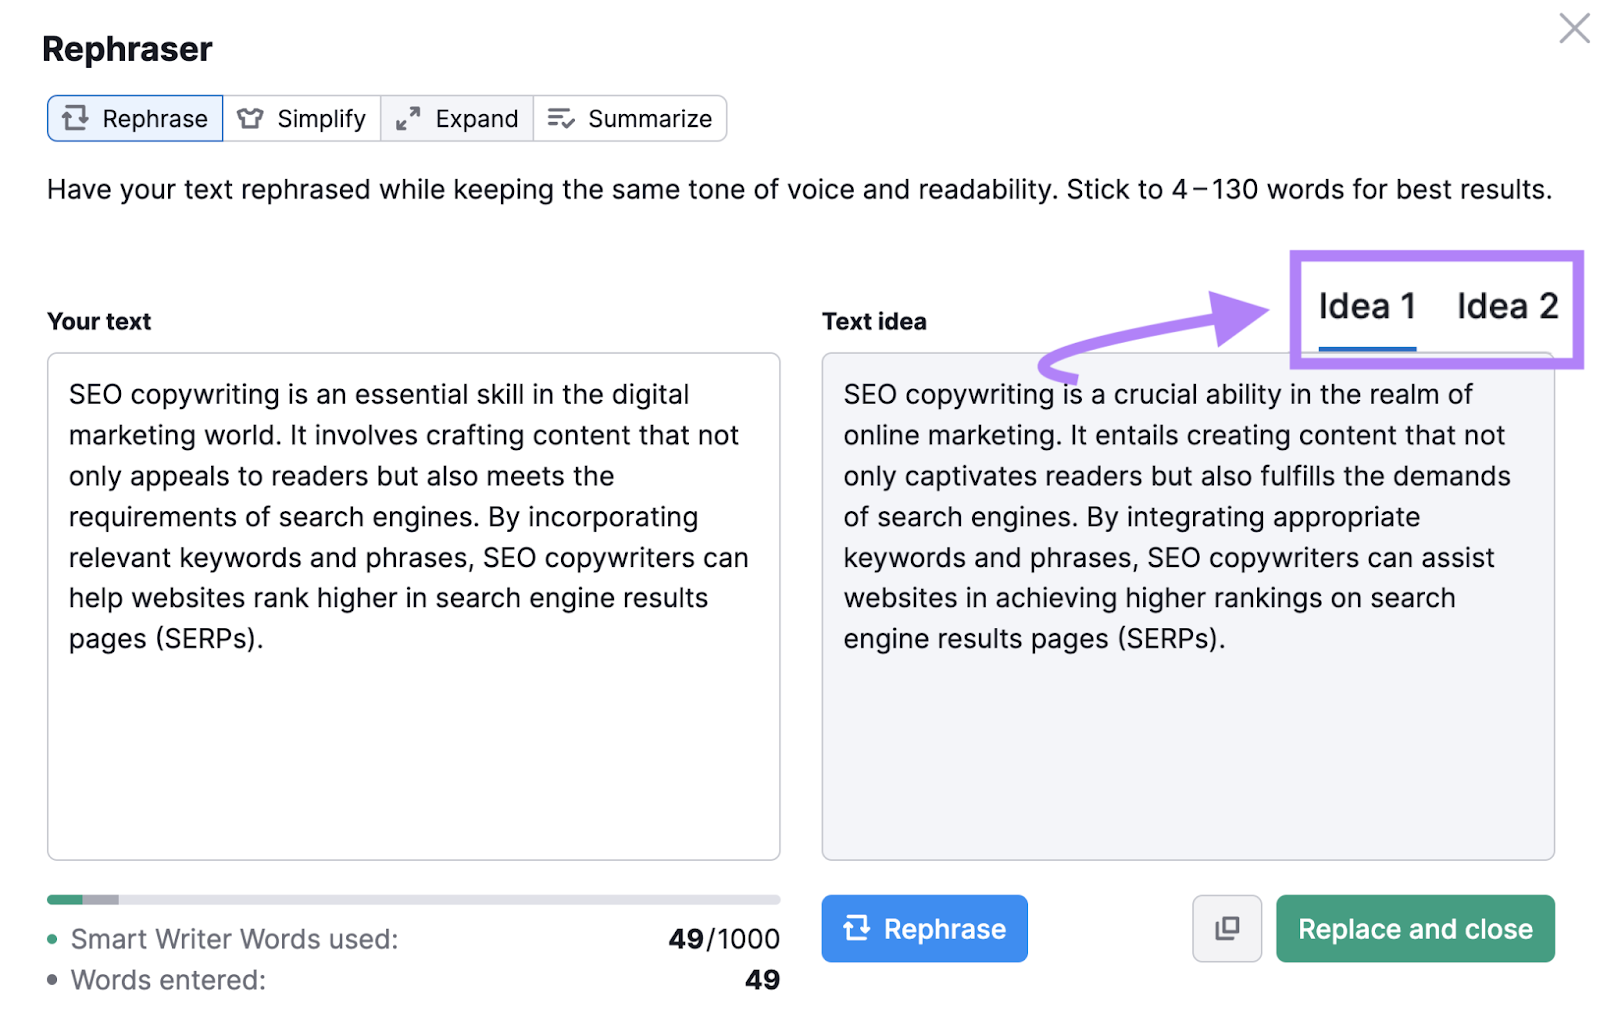 SEO Writing Assistant's "Rephraser" feature generates multiple ideas for rephrased versions of the text